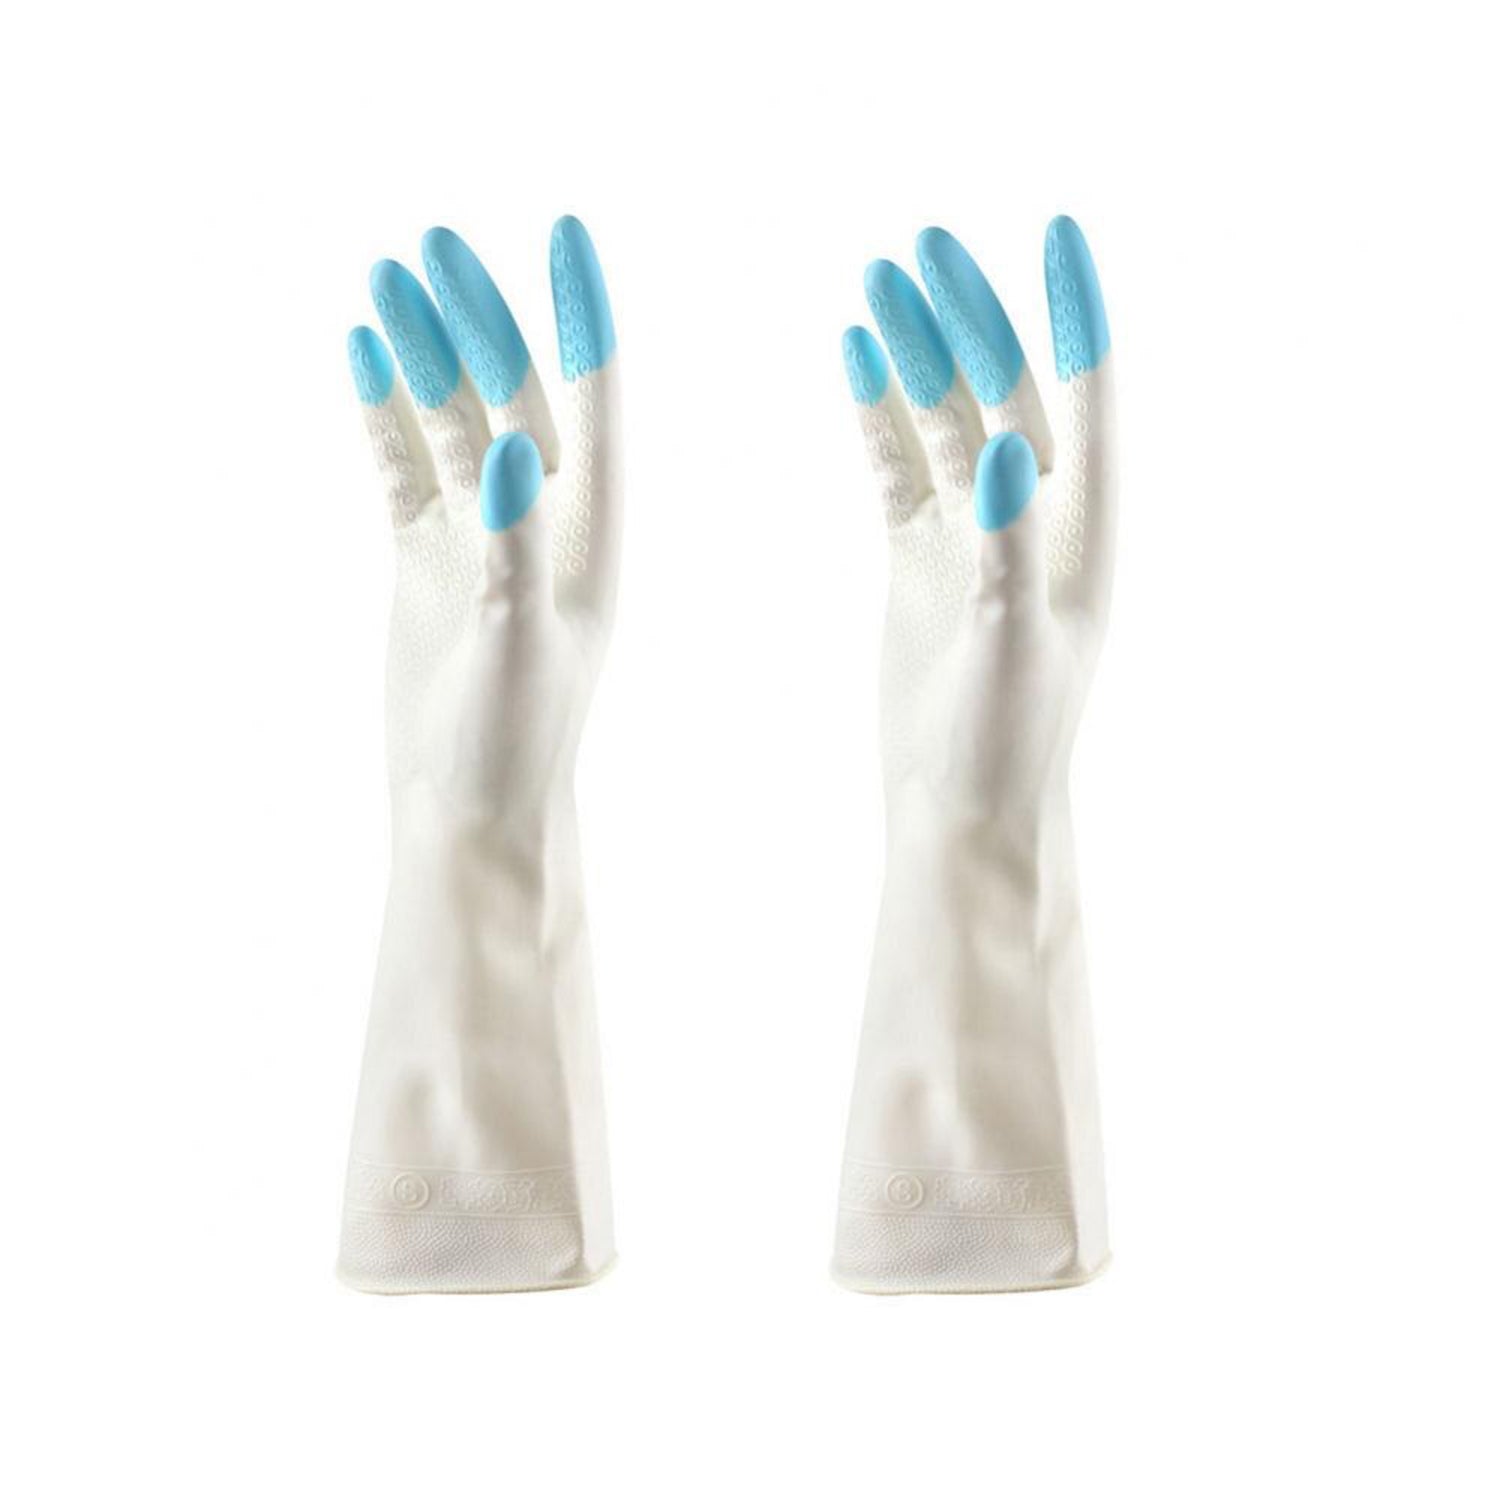 4934 Reusable Rubber Latex PVC Flock lined Elbow Length Hand Gloves cleaning gloves DeoDap